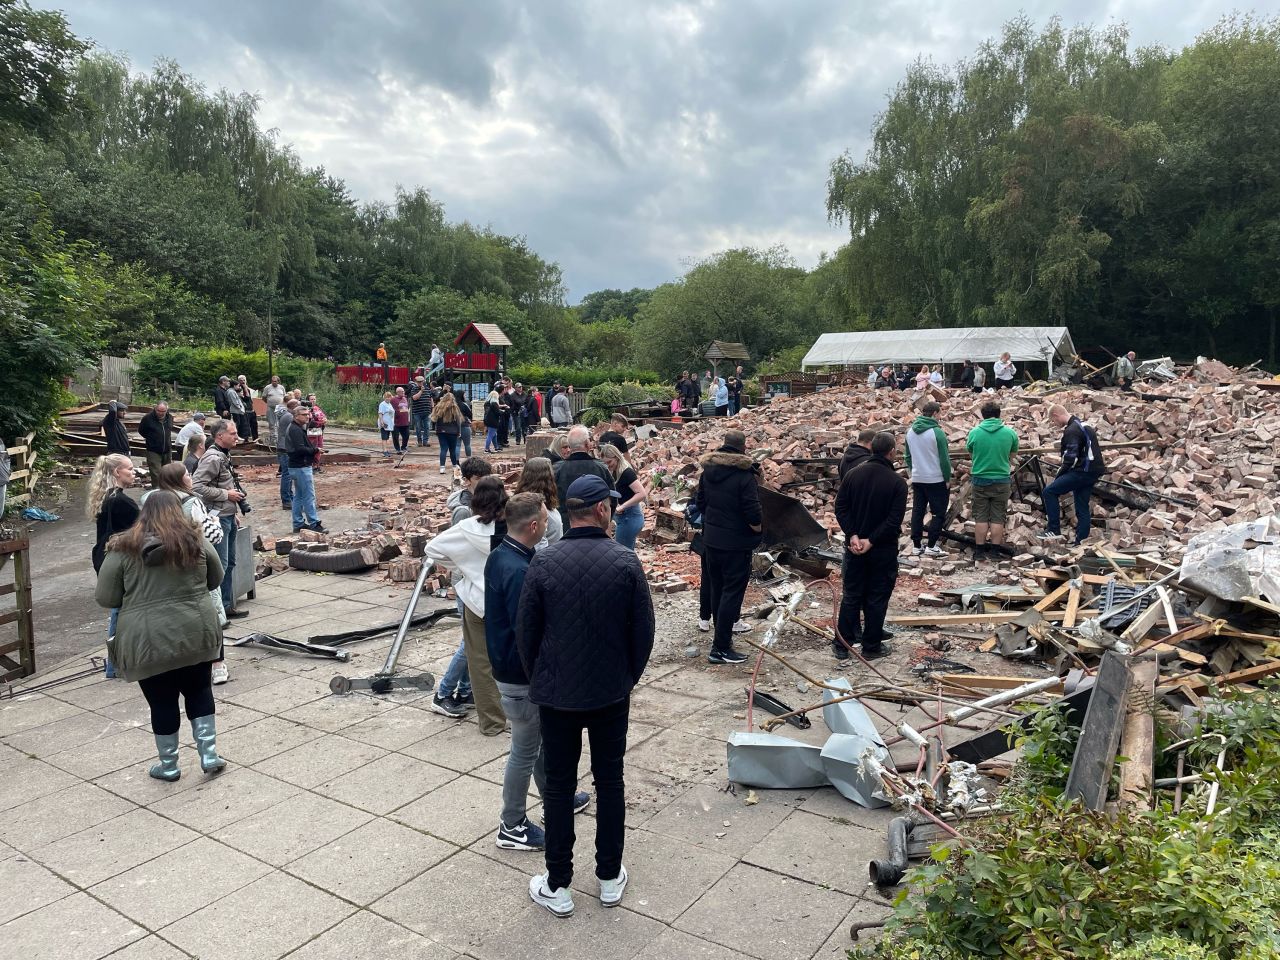 People inspect the rubble as they gather at The ruins of The Crooked House pub.